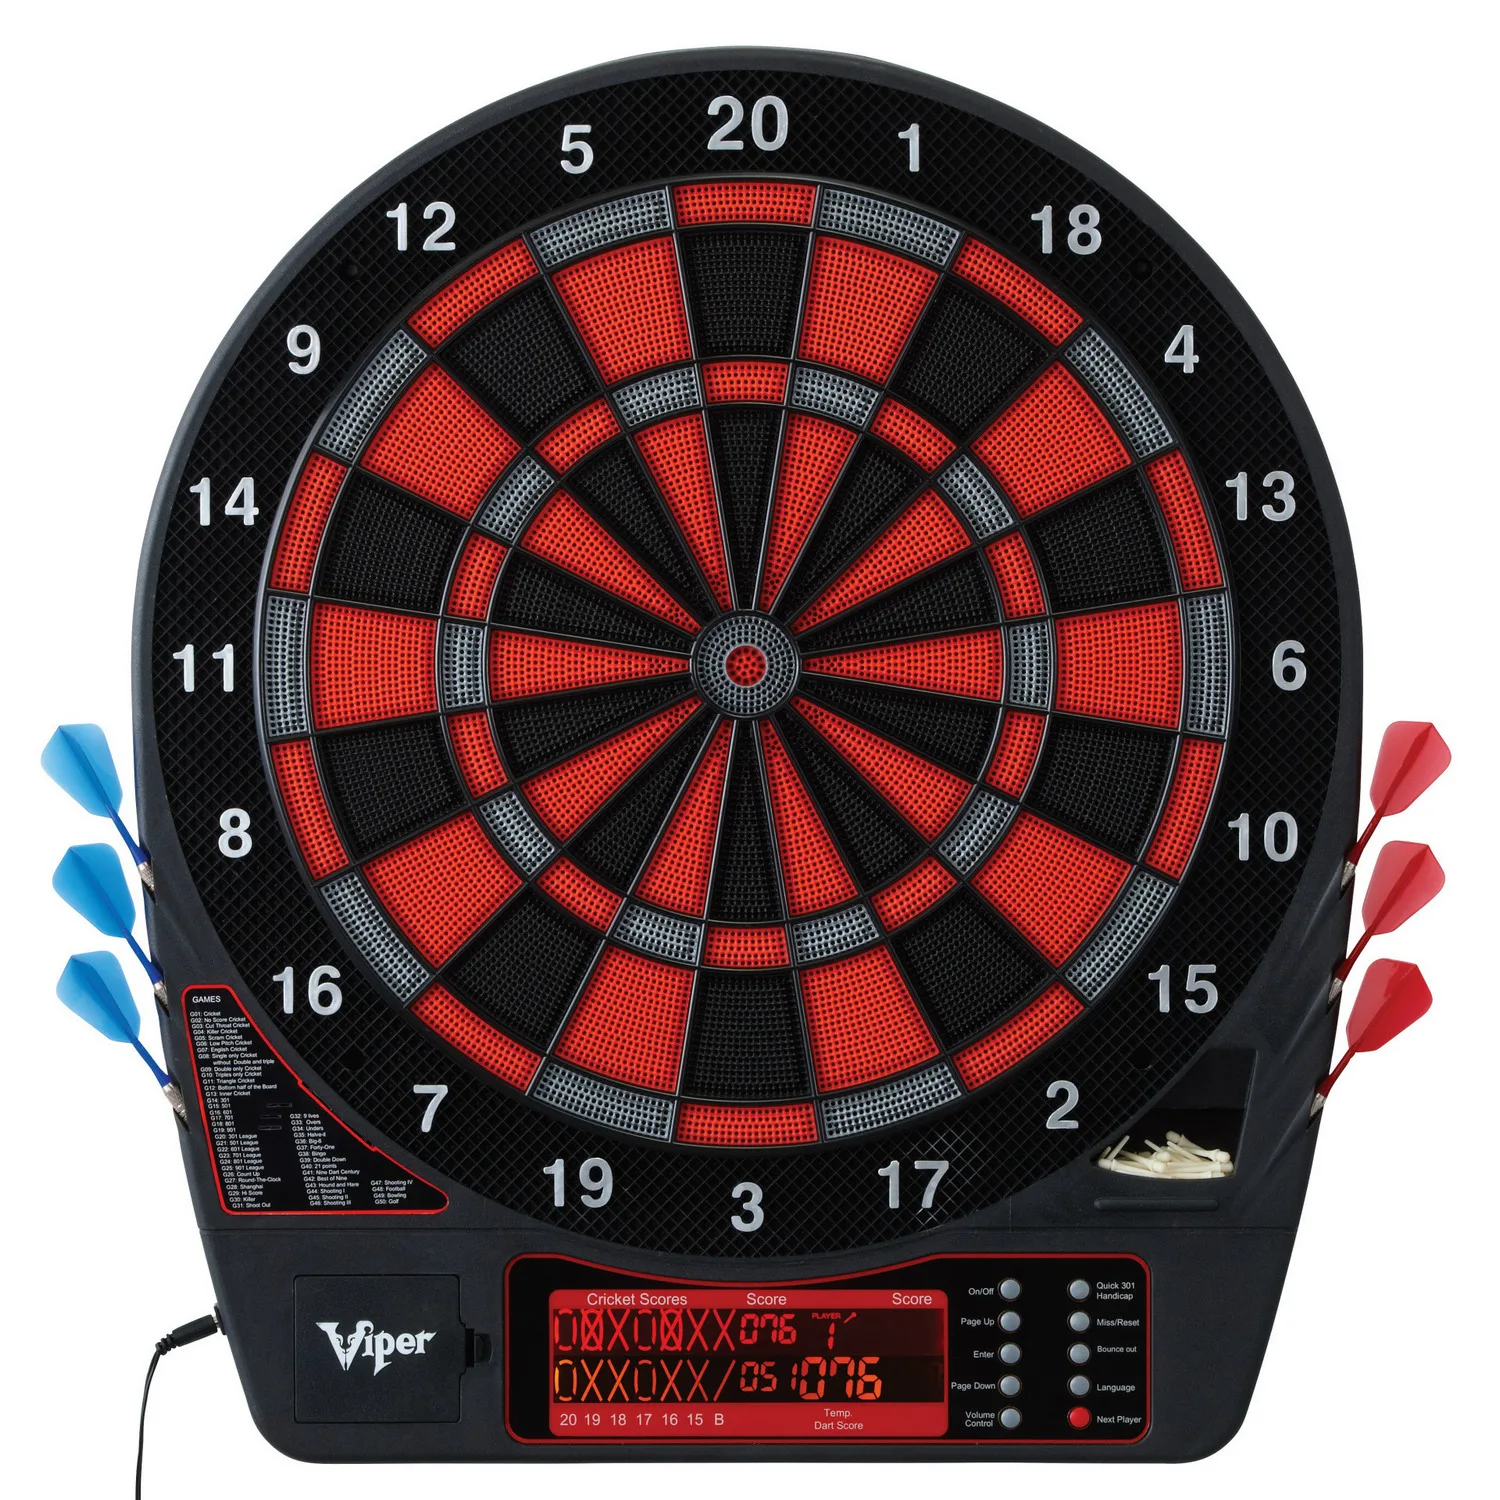 Original  Viper Specter Electronic Dartboard Pro Size 50 Games Height LCD Display Scoreboard with Impact-Tough Nylon Target tactical headset helmet adapter wendy rail for howard leight impact sport electronic shooting earmuff airsoft shooting headphone